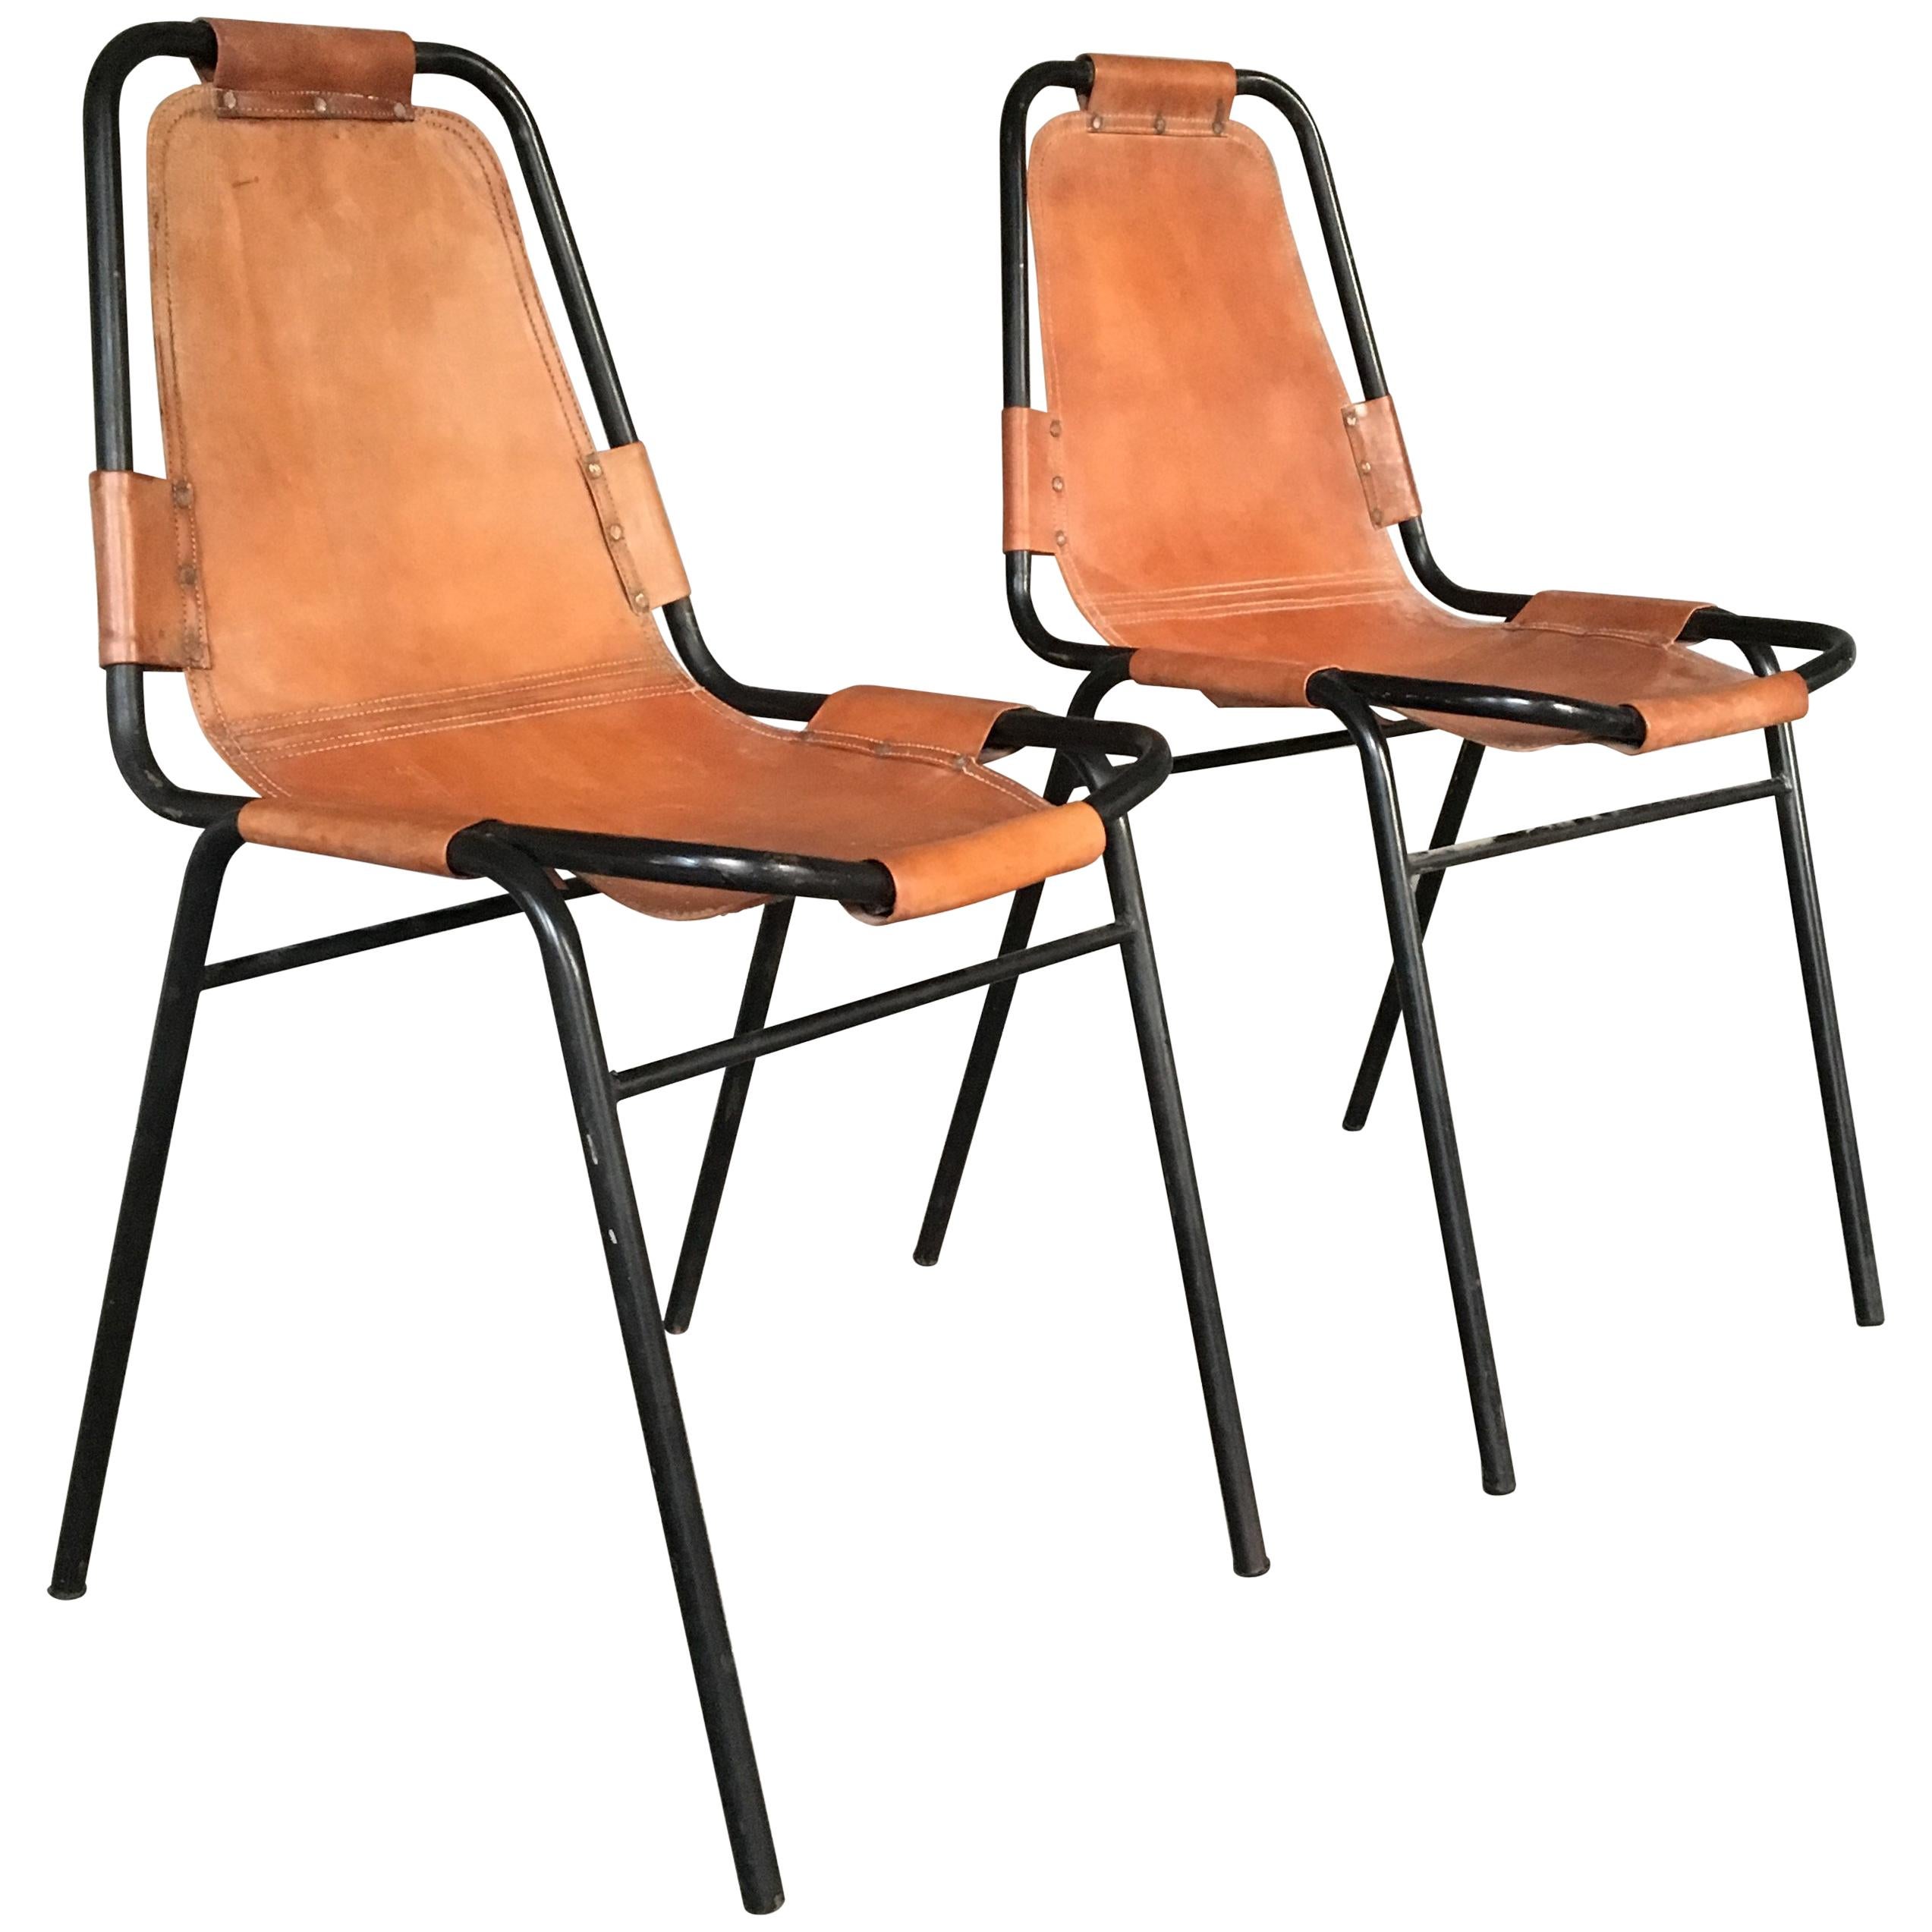 Pair of Charlotte Perriand Les Arcs Chairs, 1950s For Sale